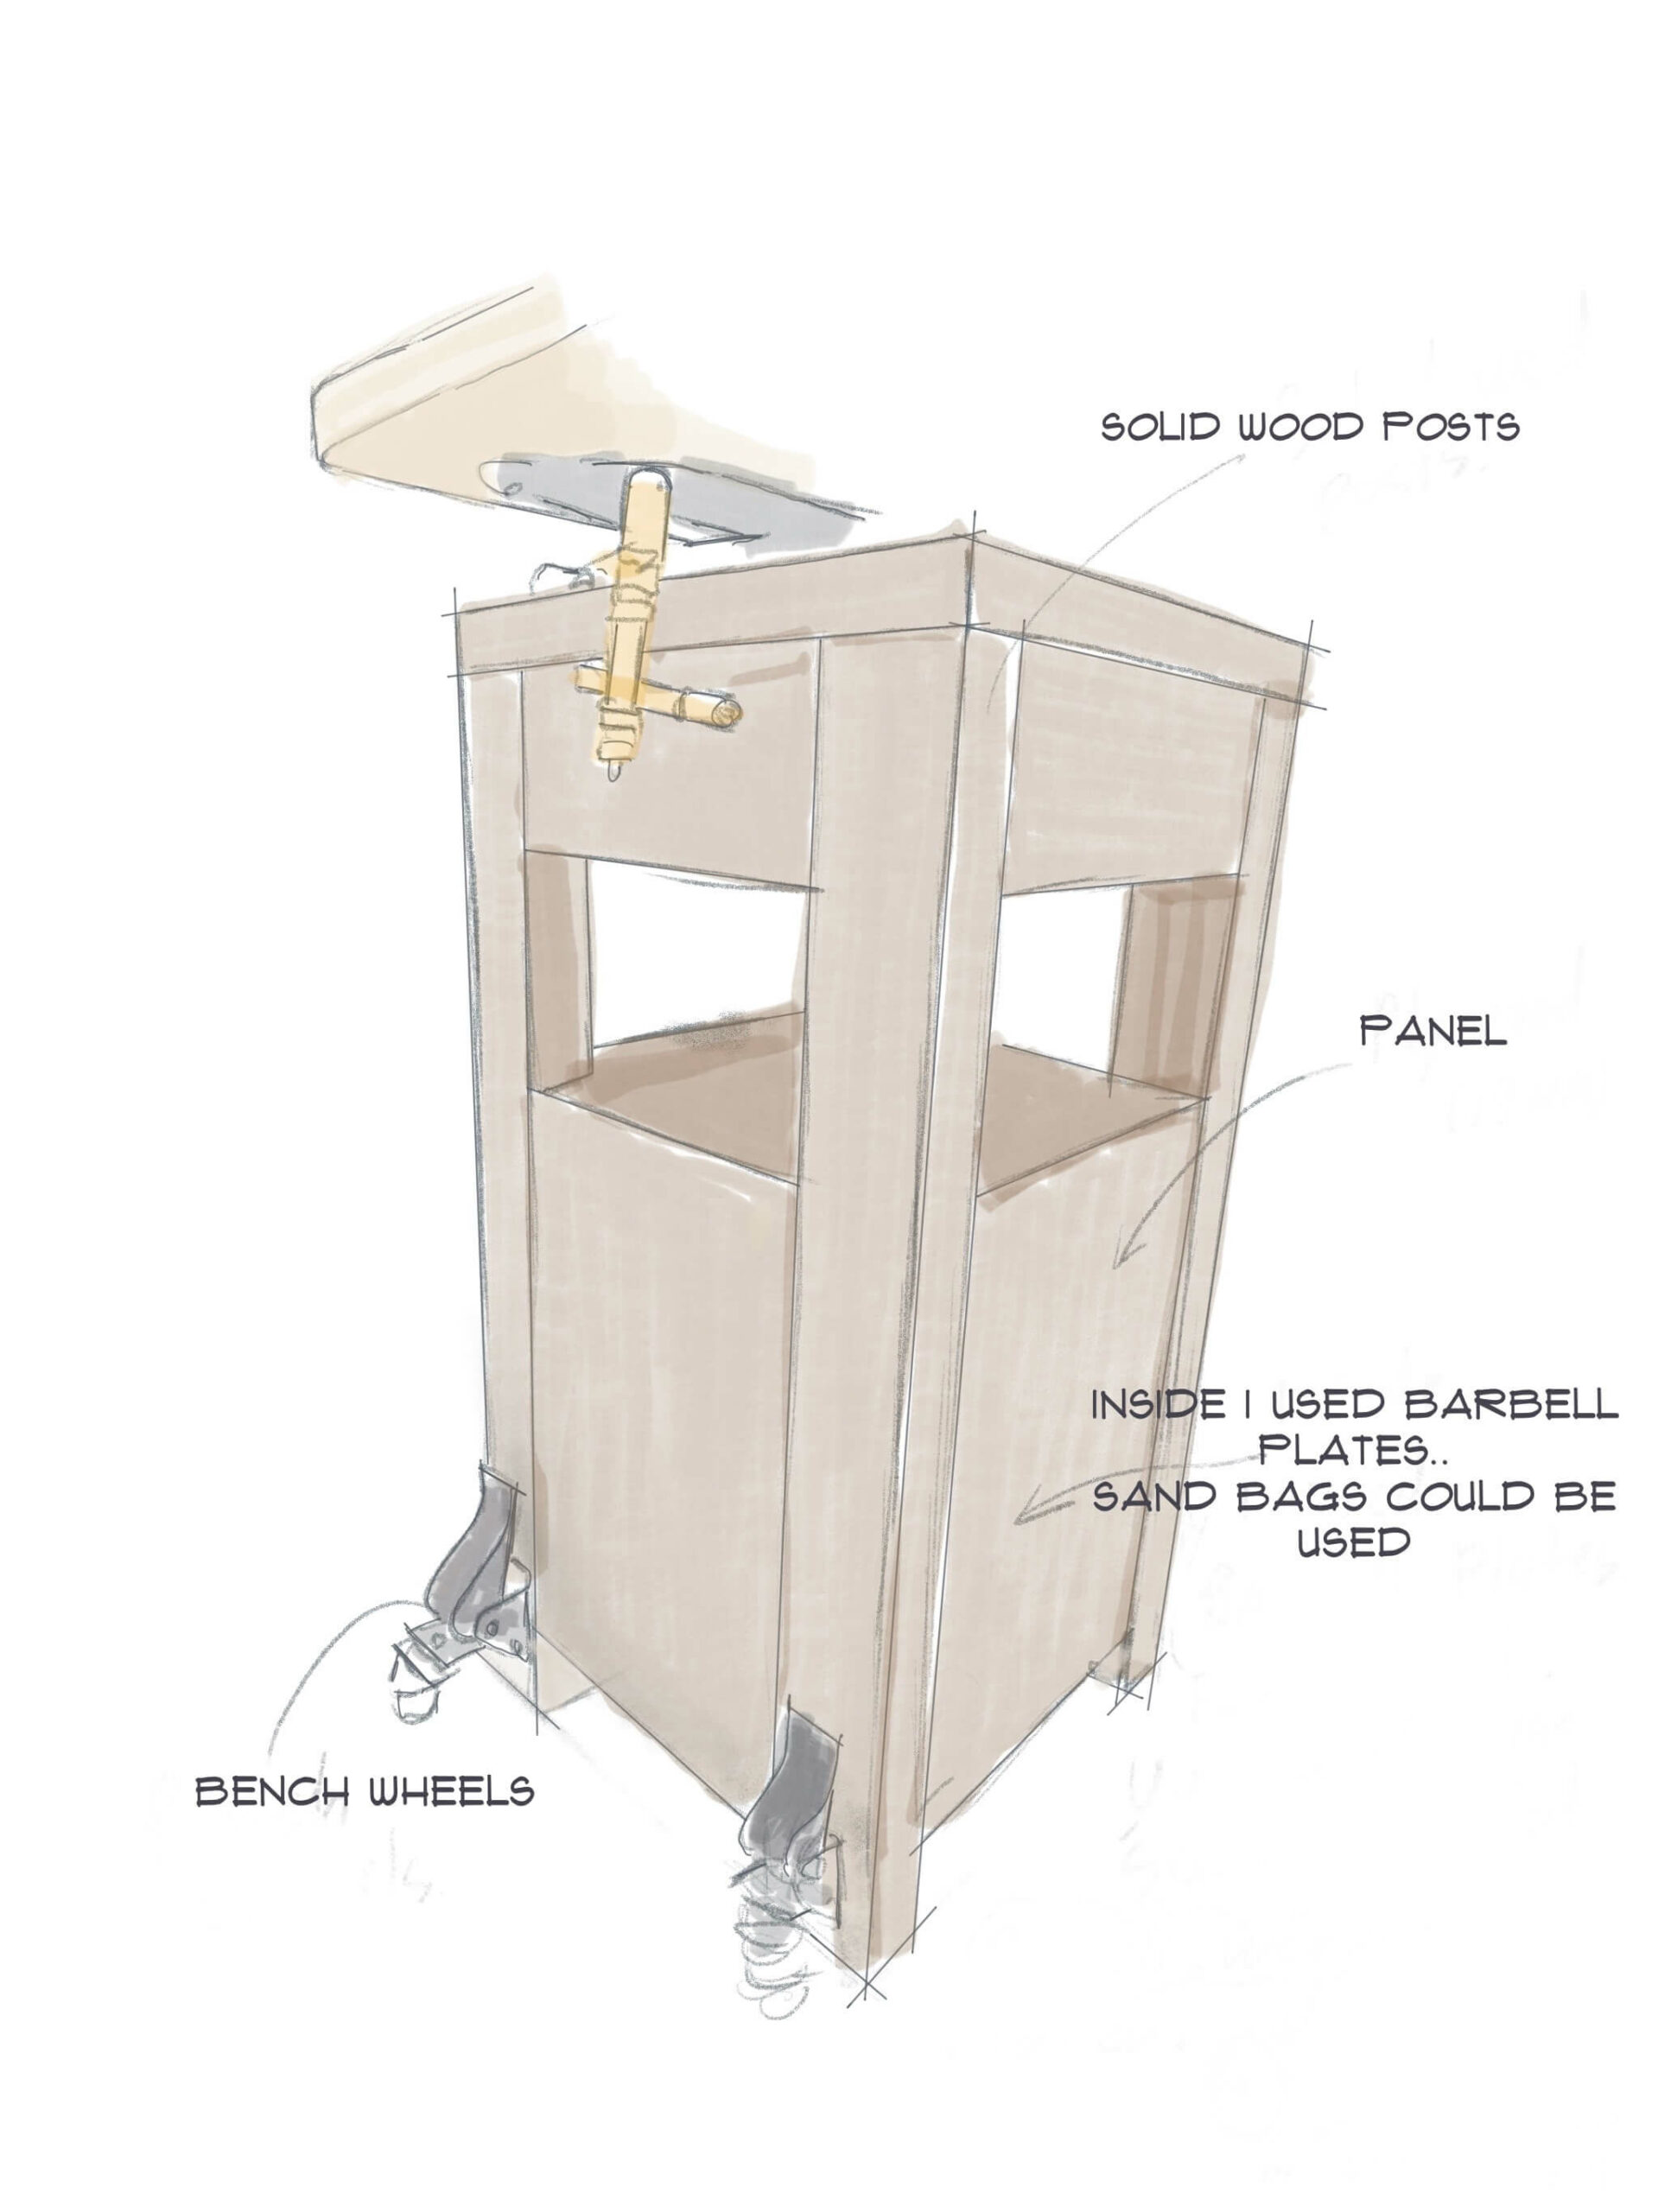 The best Woodcarver's bench | Best bench for wood carving, 
This image provides detailed information about the best workbench for woodcarving, including considerations for size, portability, and materials. It covers the advantages and disadvantages of various types of workbenches for woodcarving and provides advice on how to choose the best bench for your needs. Whether you are a beginner or an experienced woodcarver, this guide will help you find the best workbench for your woodcarving projects.